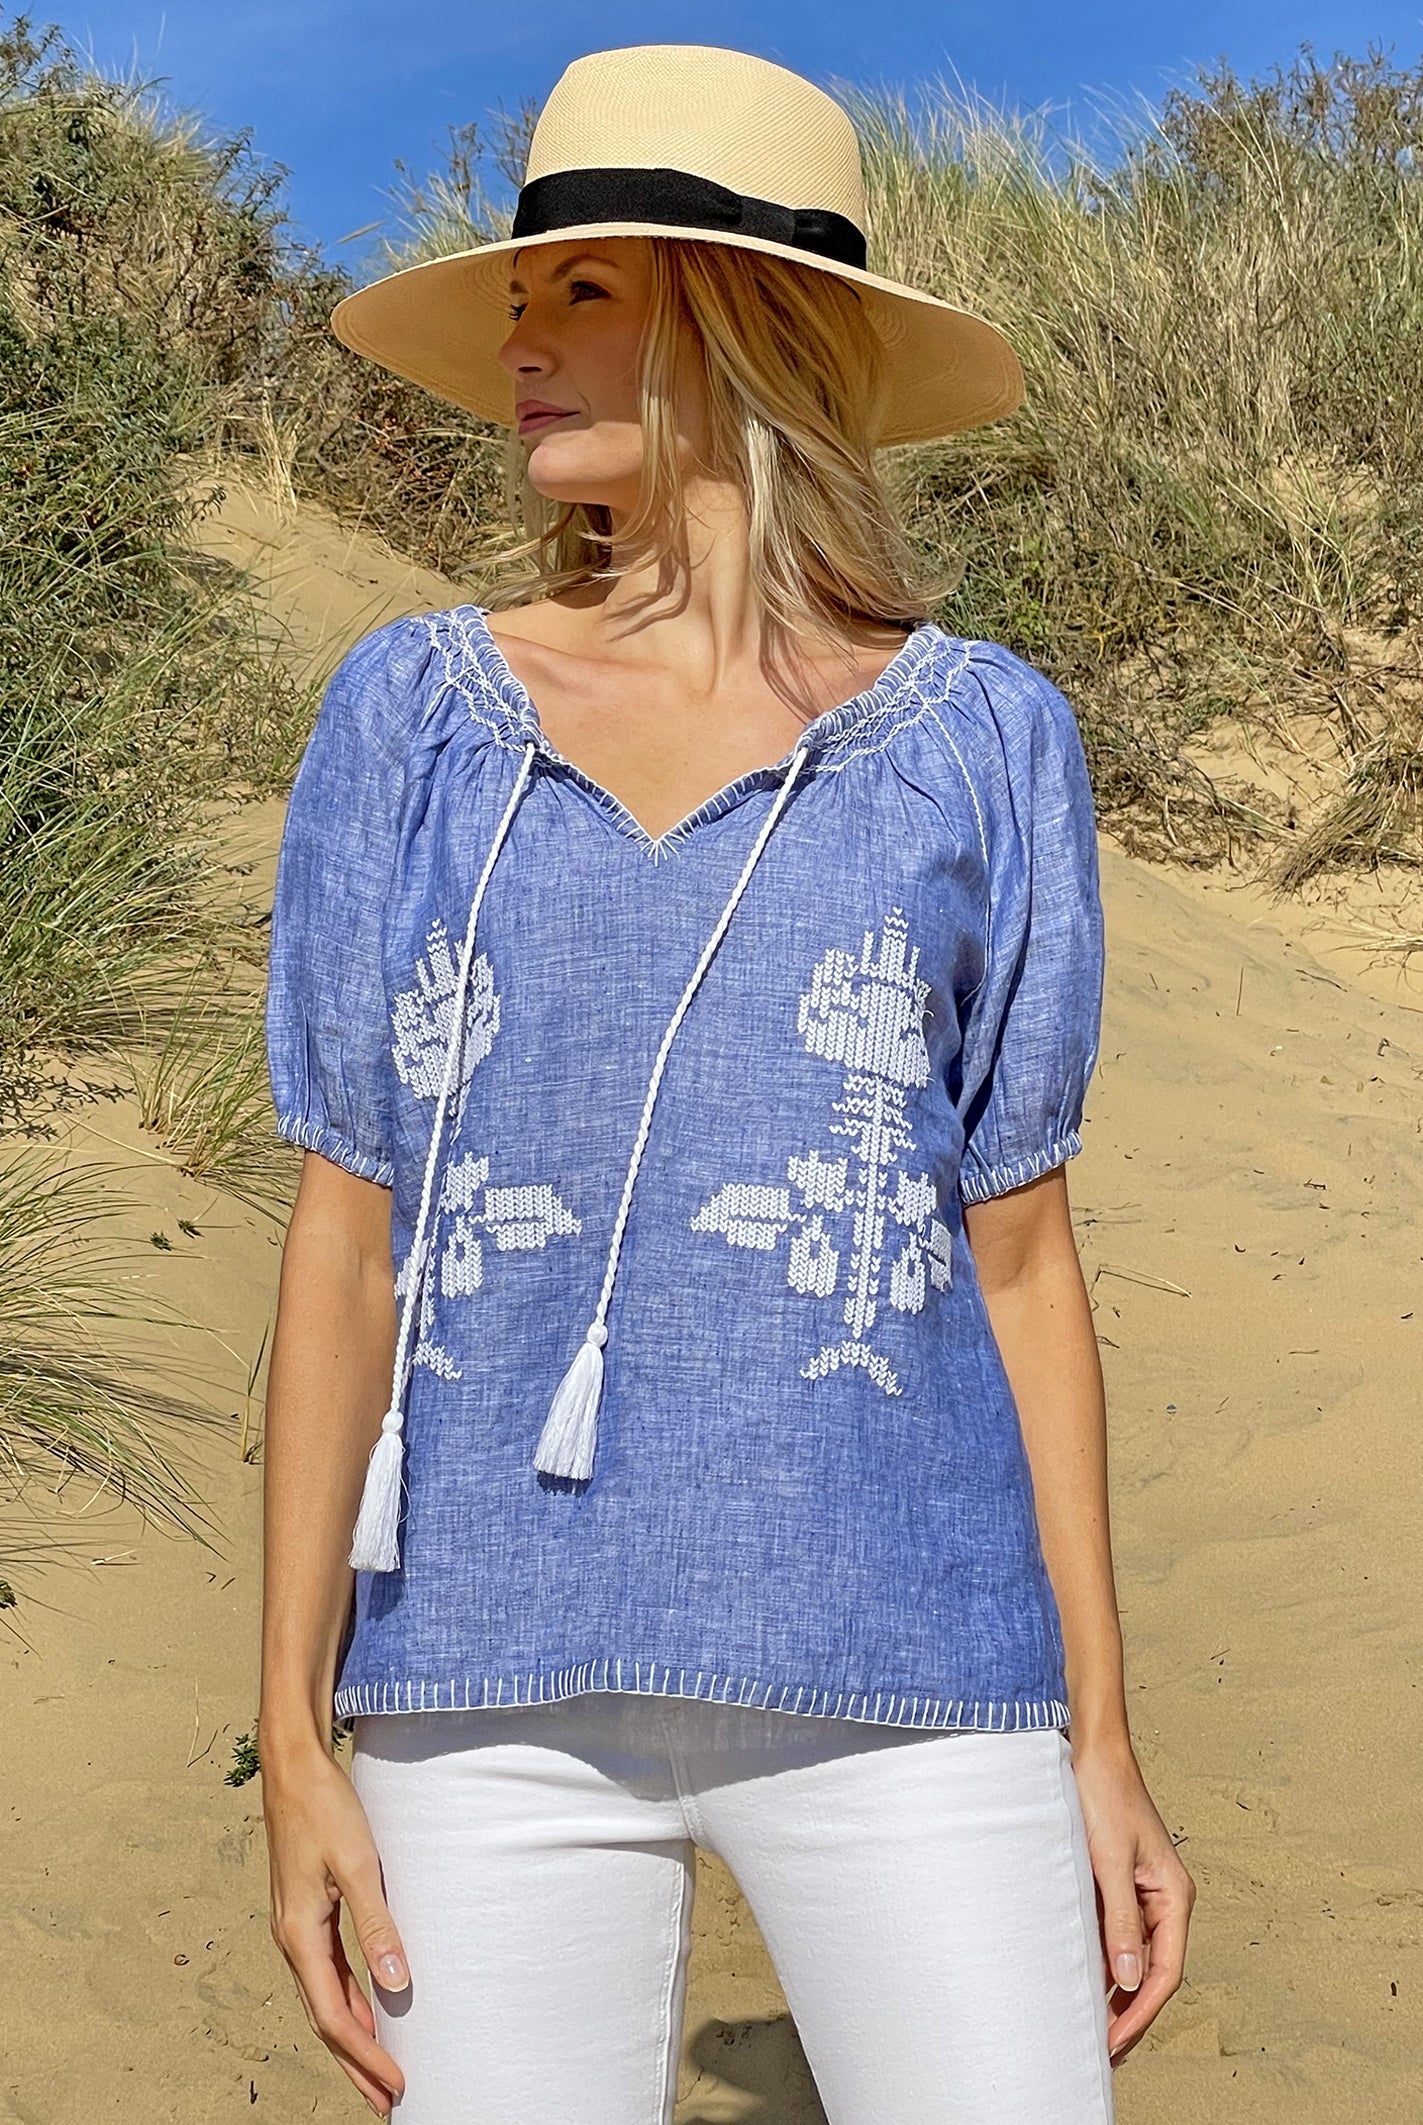 A model on a beach wearing the Rose and Rose Sorrento embroidered blue linen top and an Anthony Peto Panama hat.